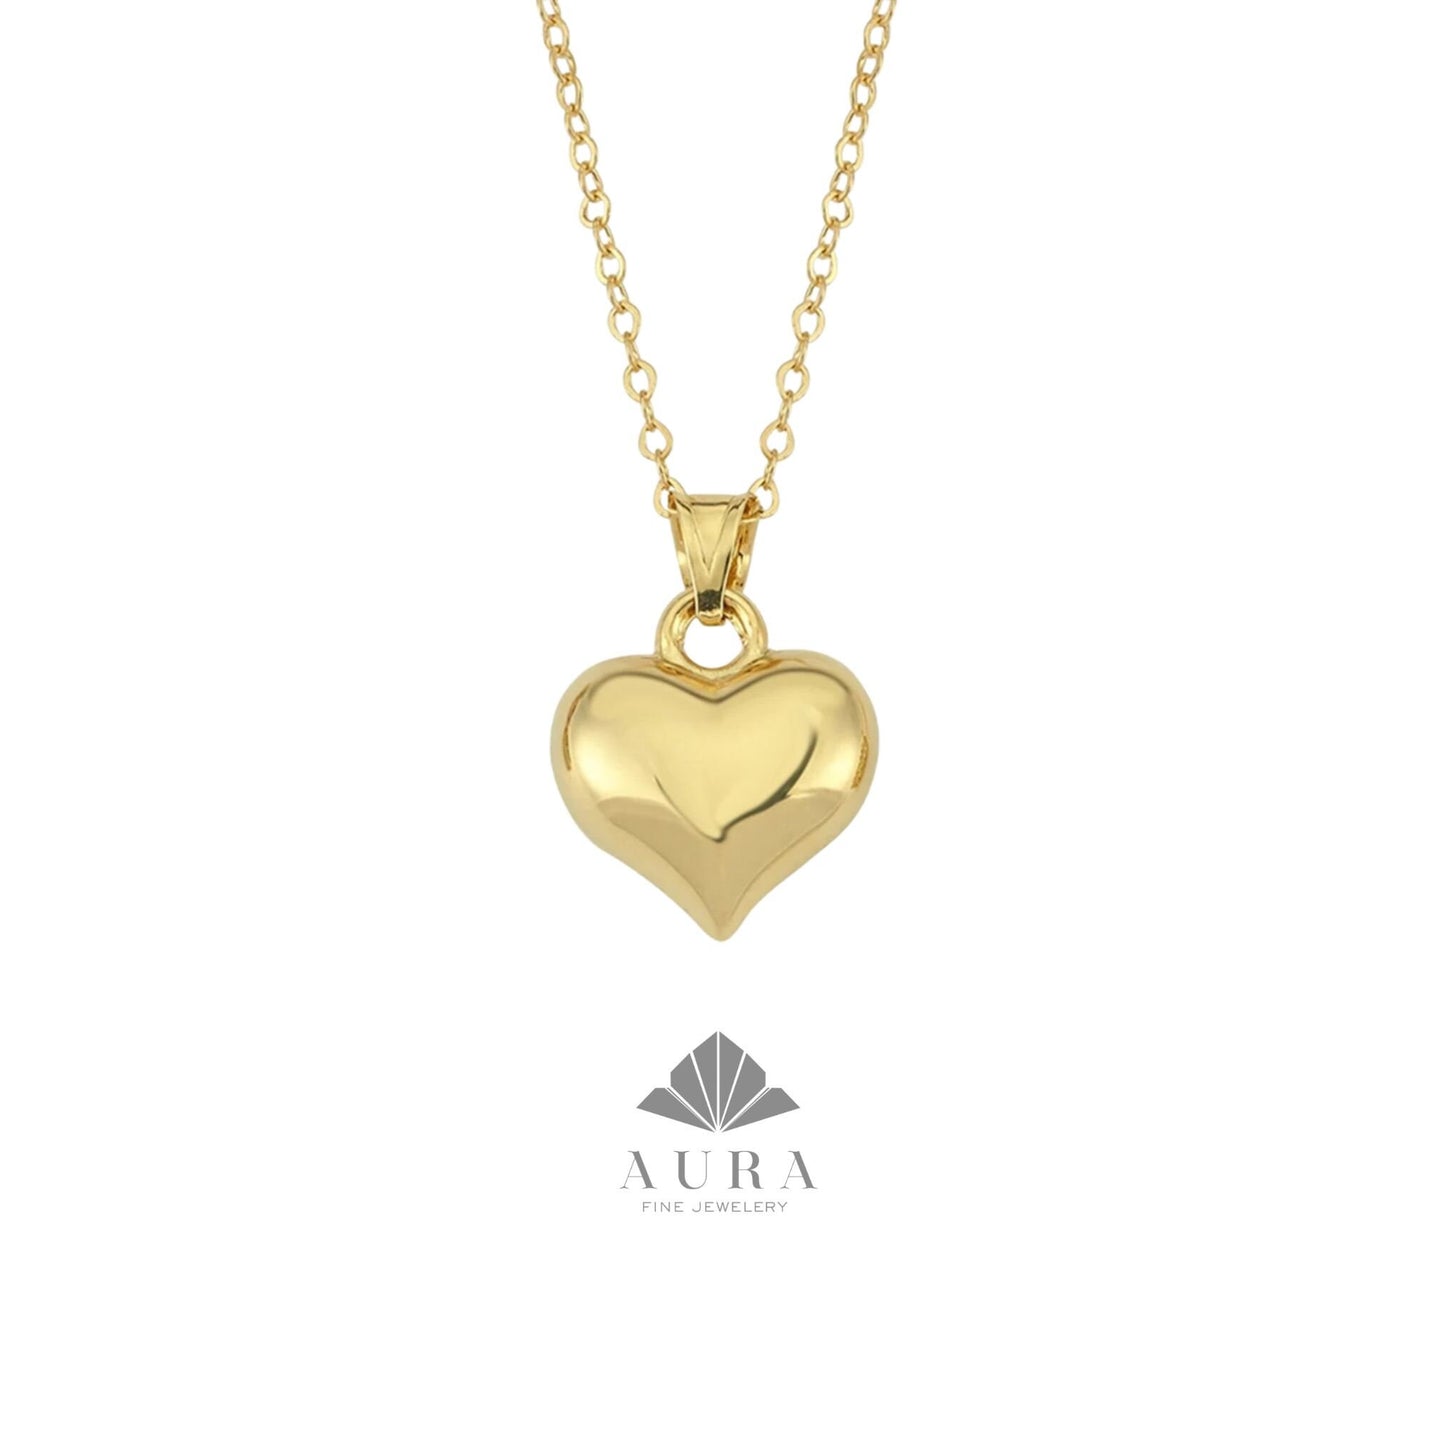 14K Gold Puffed Heart Necklace, 3D Heart Pendant, Gold Love Choker, Mini Heart Charm, Dainty Heart Necklace, Anniversary Gift For Her